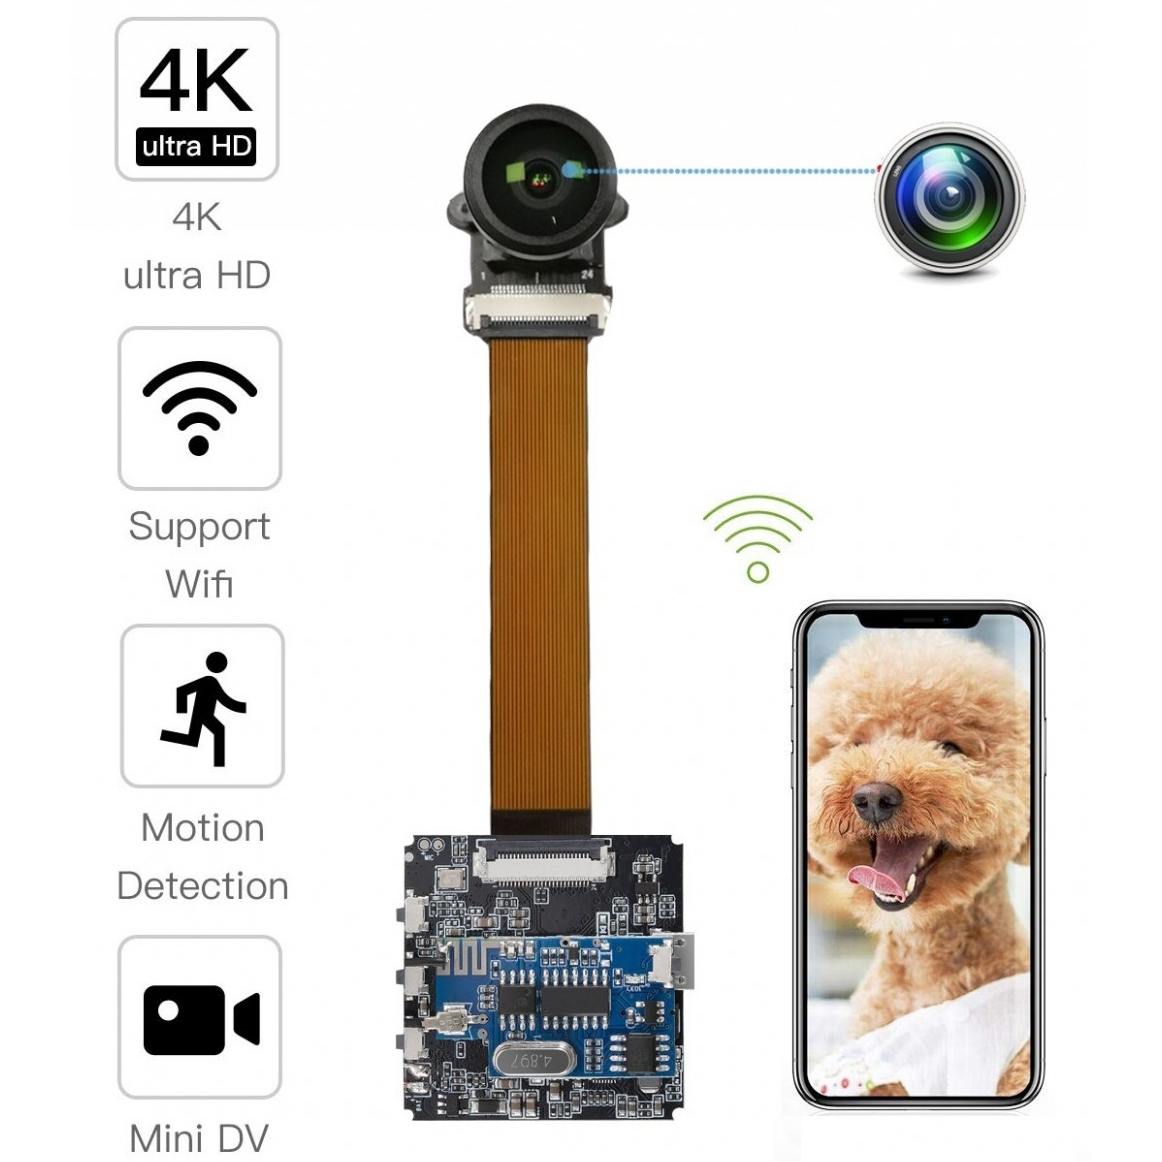 2021 China New DesignHOME SECURITY INDOOR CAMERA-
 4K Real Ultra HD DIY Wireless Camera Big Wide Angle 6CM Mini DVR Motion Detection Nanny Cam Security System APP Control Action Camera up to 400GB – MATECAM